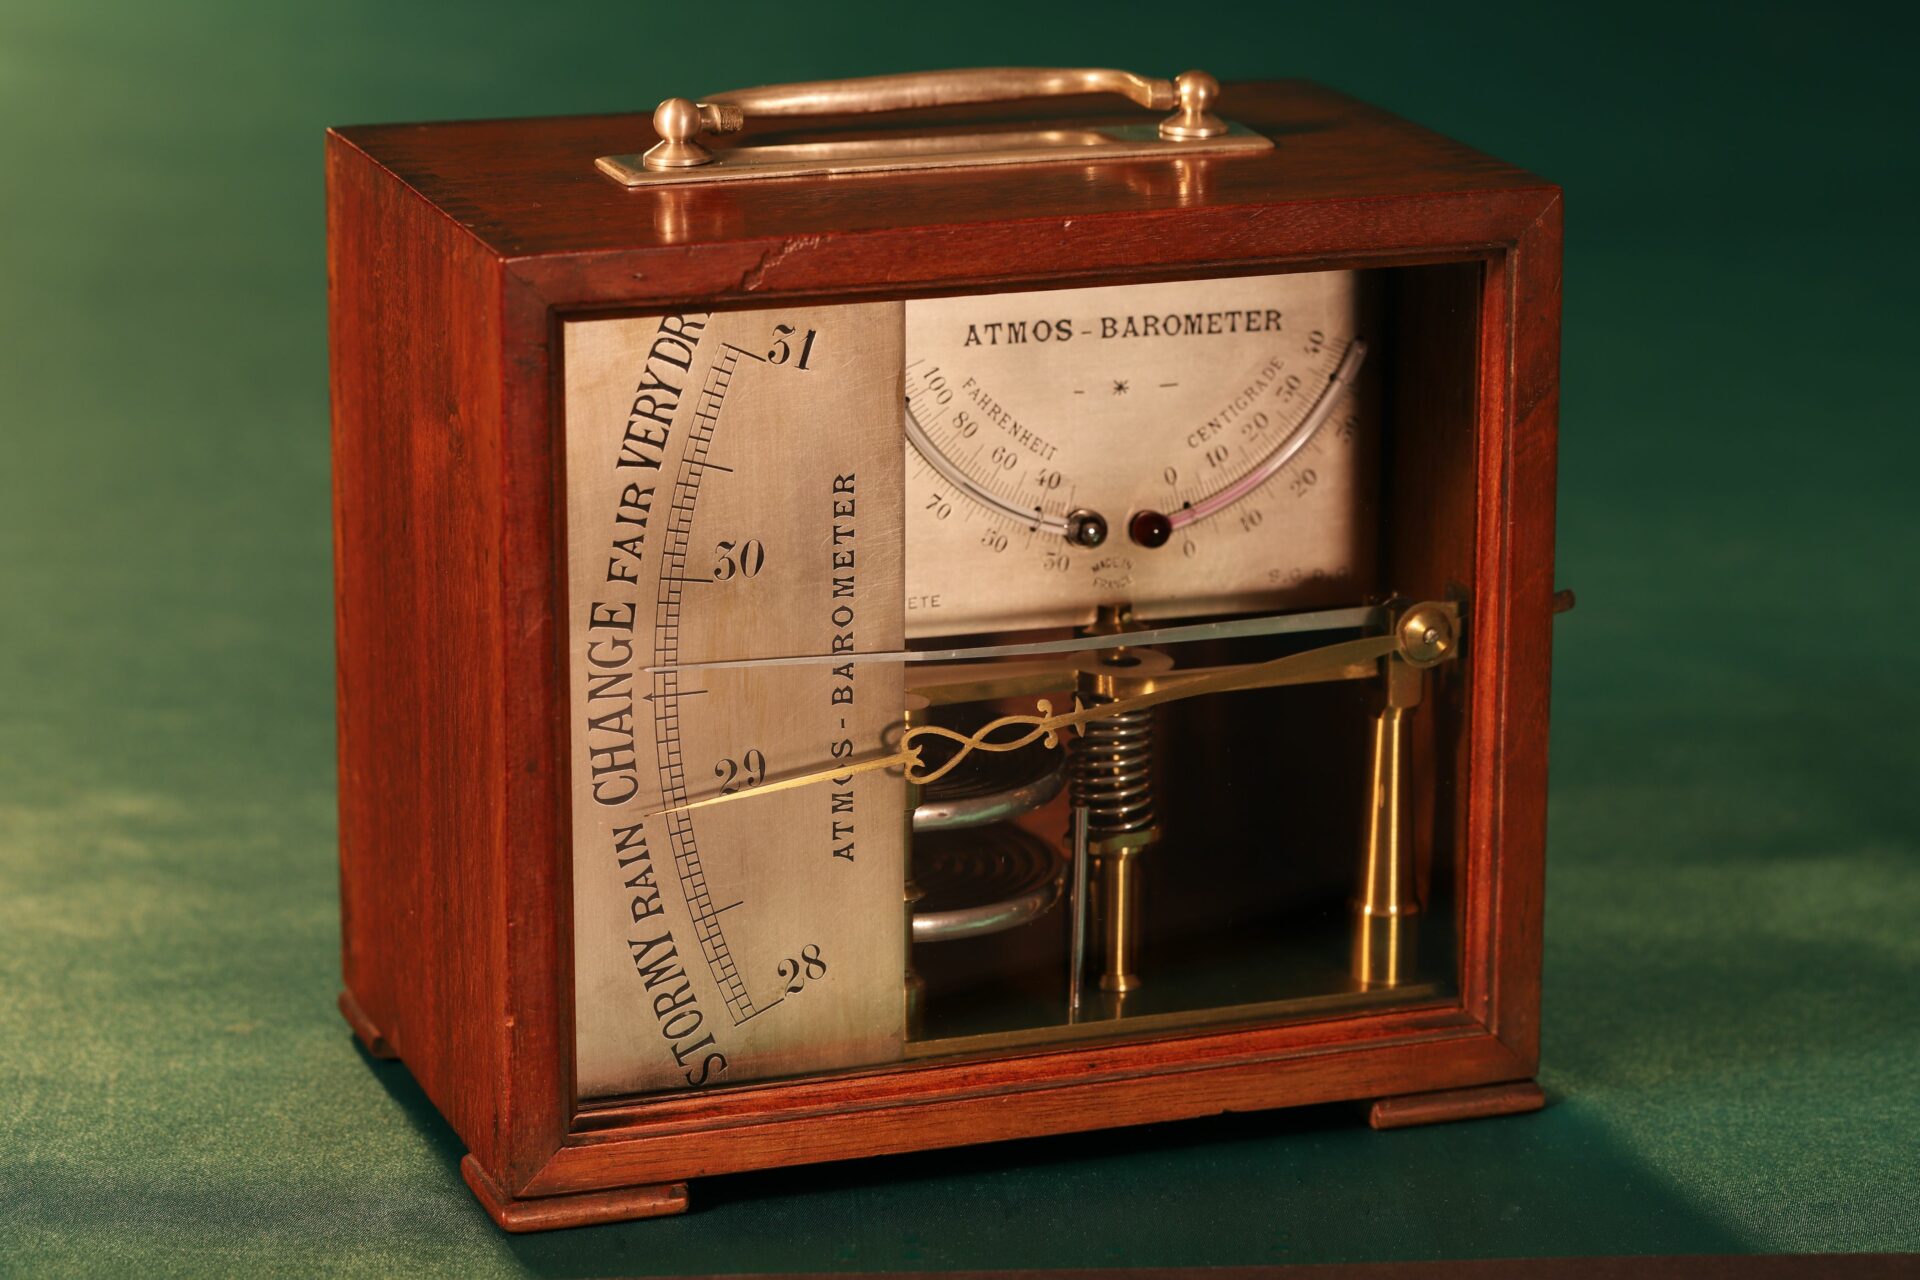 Image of the cased French Atmos Barometer c1875 taken from the left